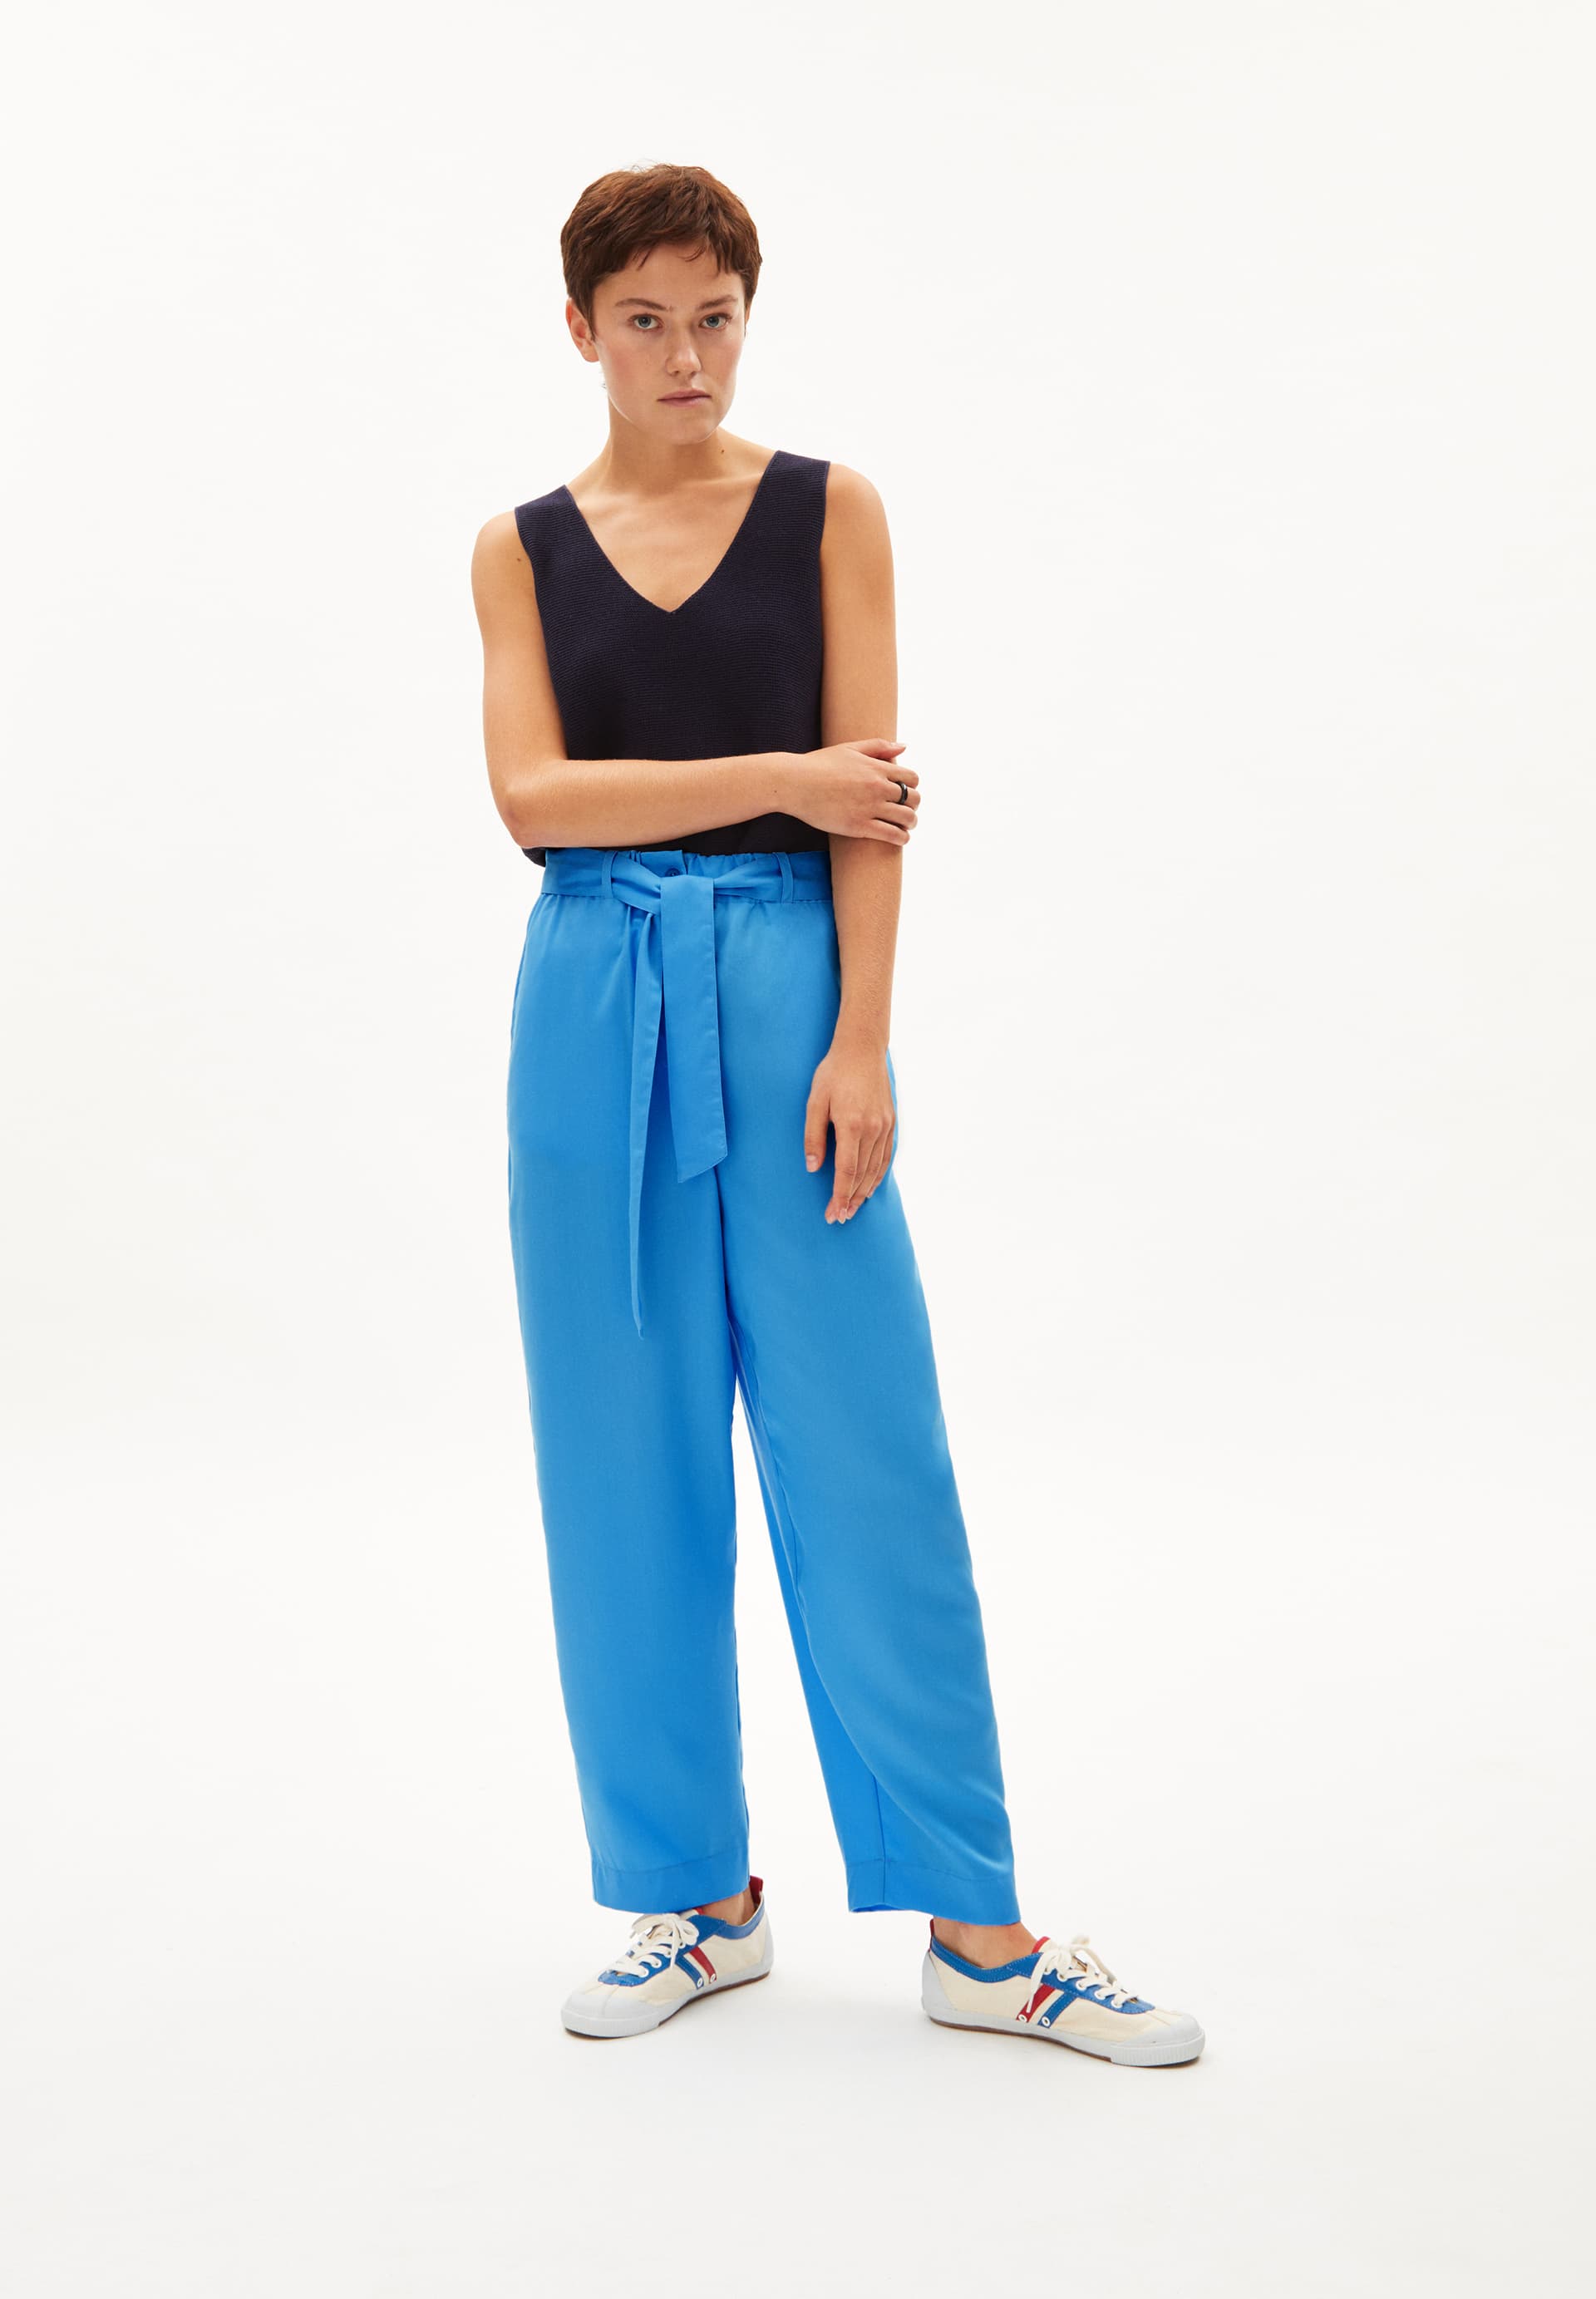 SAAMERA Pants Relaxed Fit made of TENCEL™ Lyocell